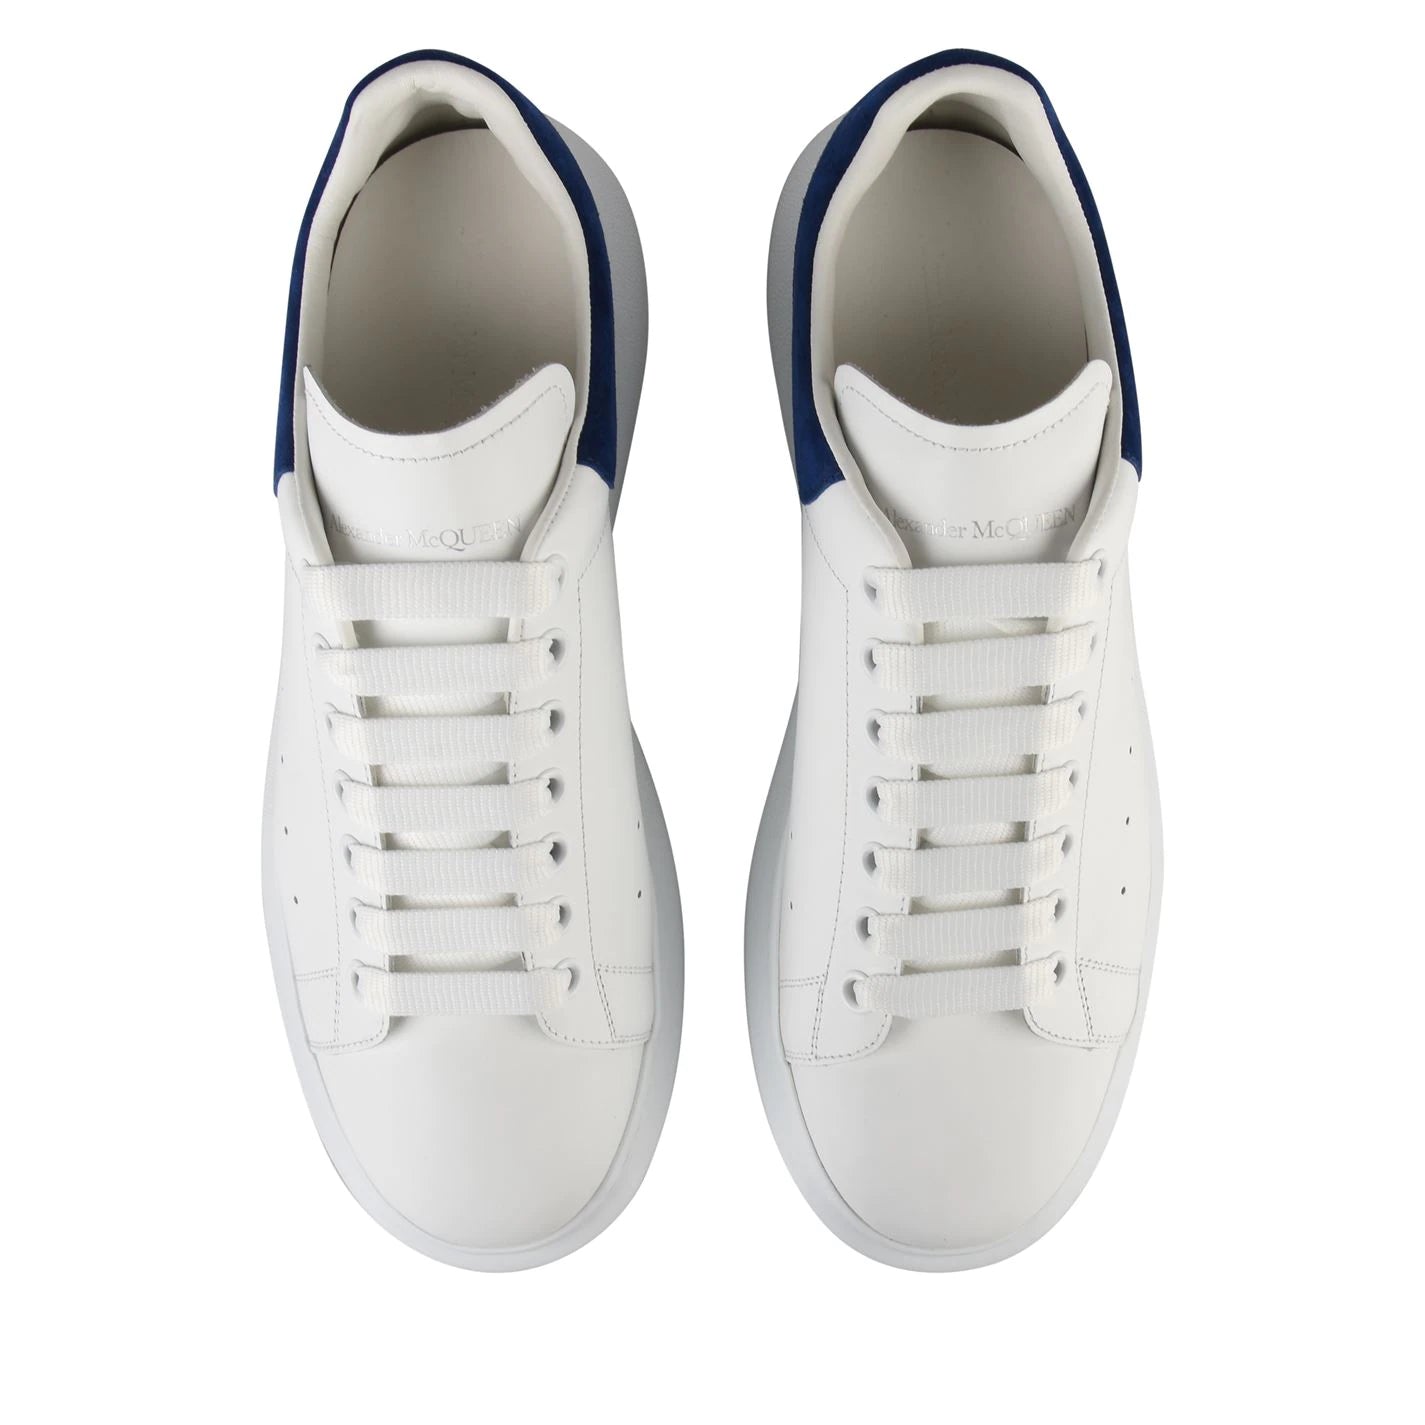 Double Boxed  419.99 Alexander McQueen Oversized White Blue Men's Double Boxed